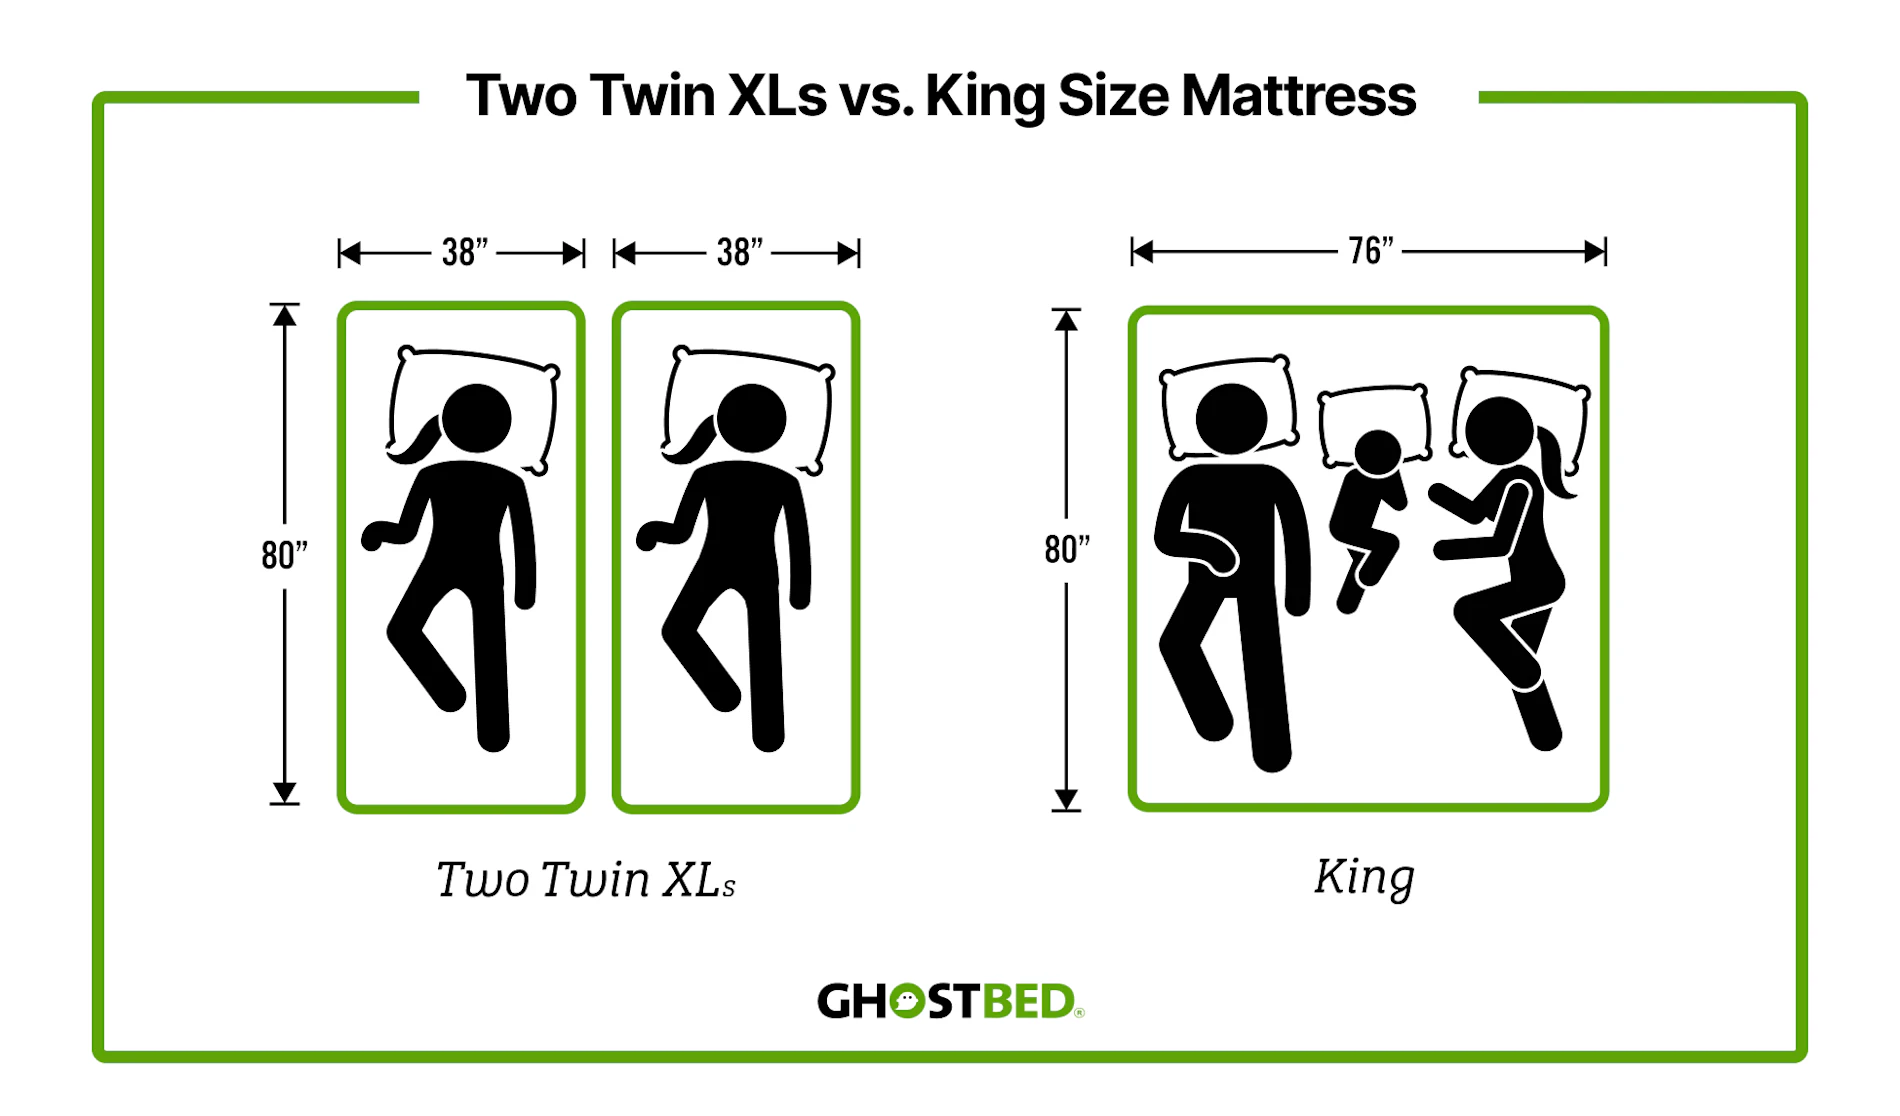 https://ghostbed-cdn.imgix.net/ghostbed-global/education-center/two-twin-beds-together/twin-xl-vs-king-size-mattress.jpg?w=1900&fm=webp